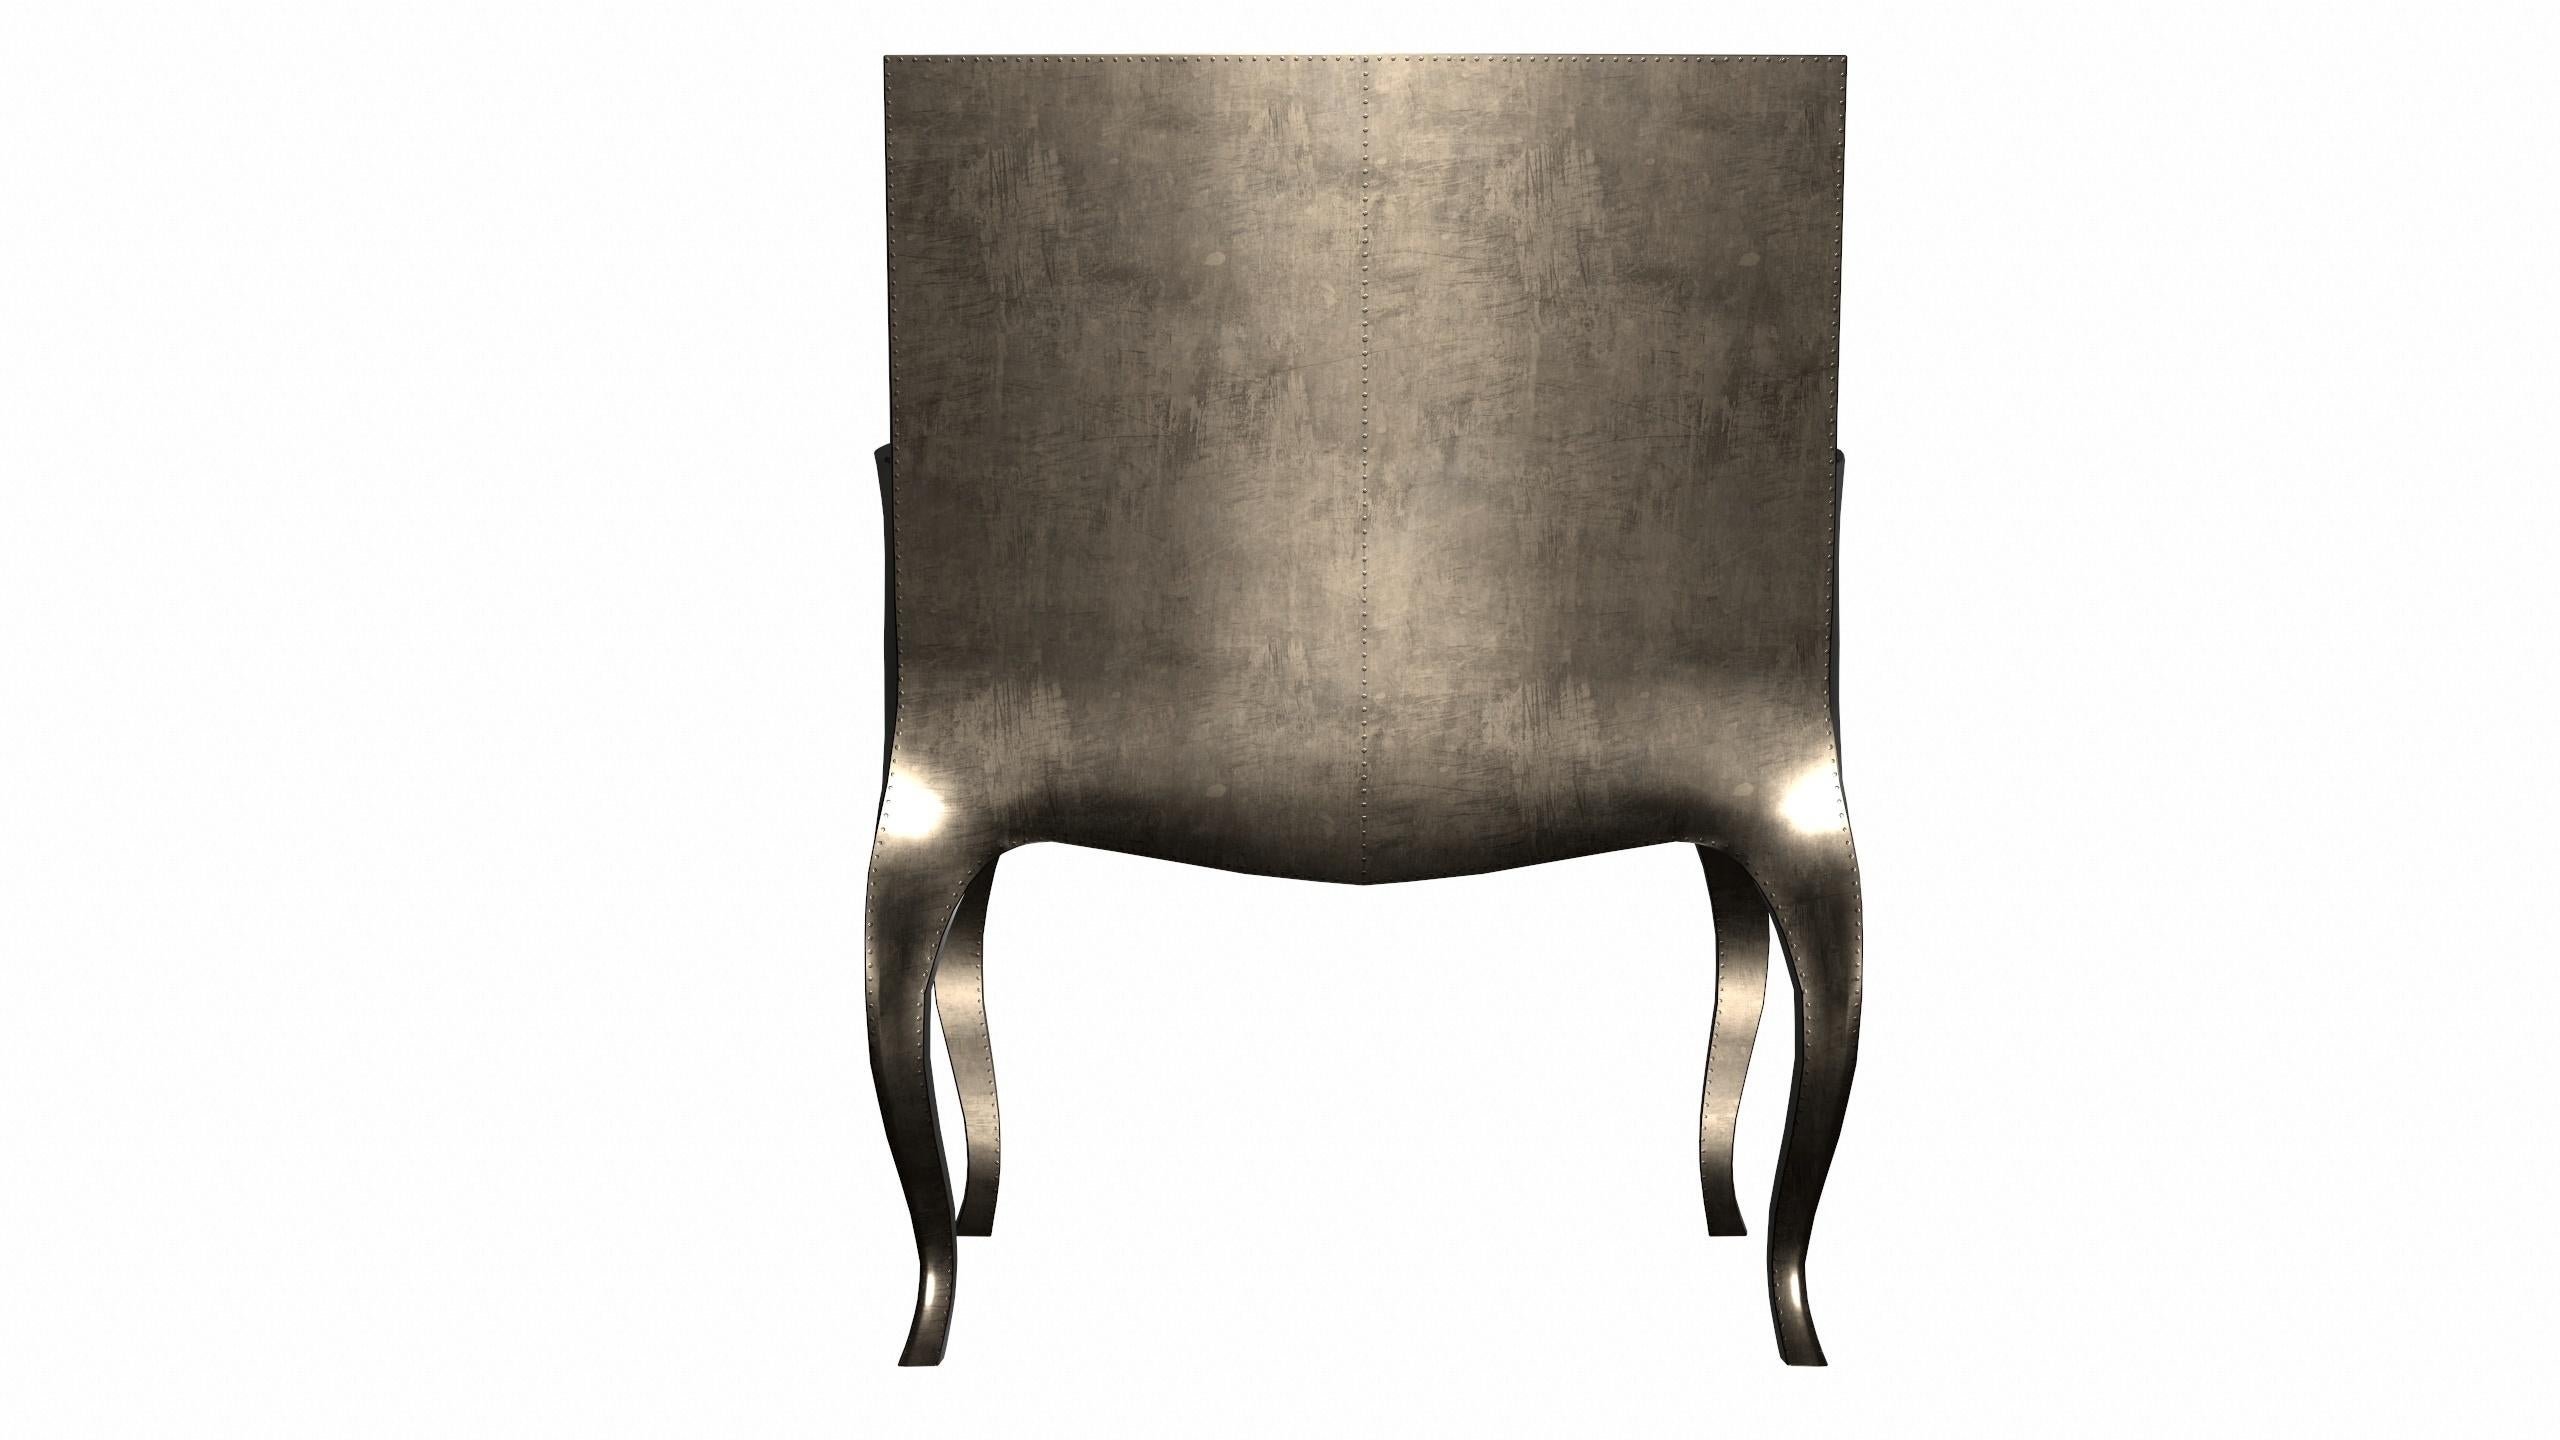 Hammered Art Nouveau Dining Chairs in Smooth Antique by Paul Mathieu for S. Odegard For Sale